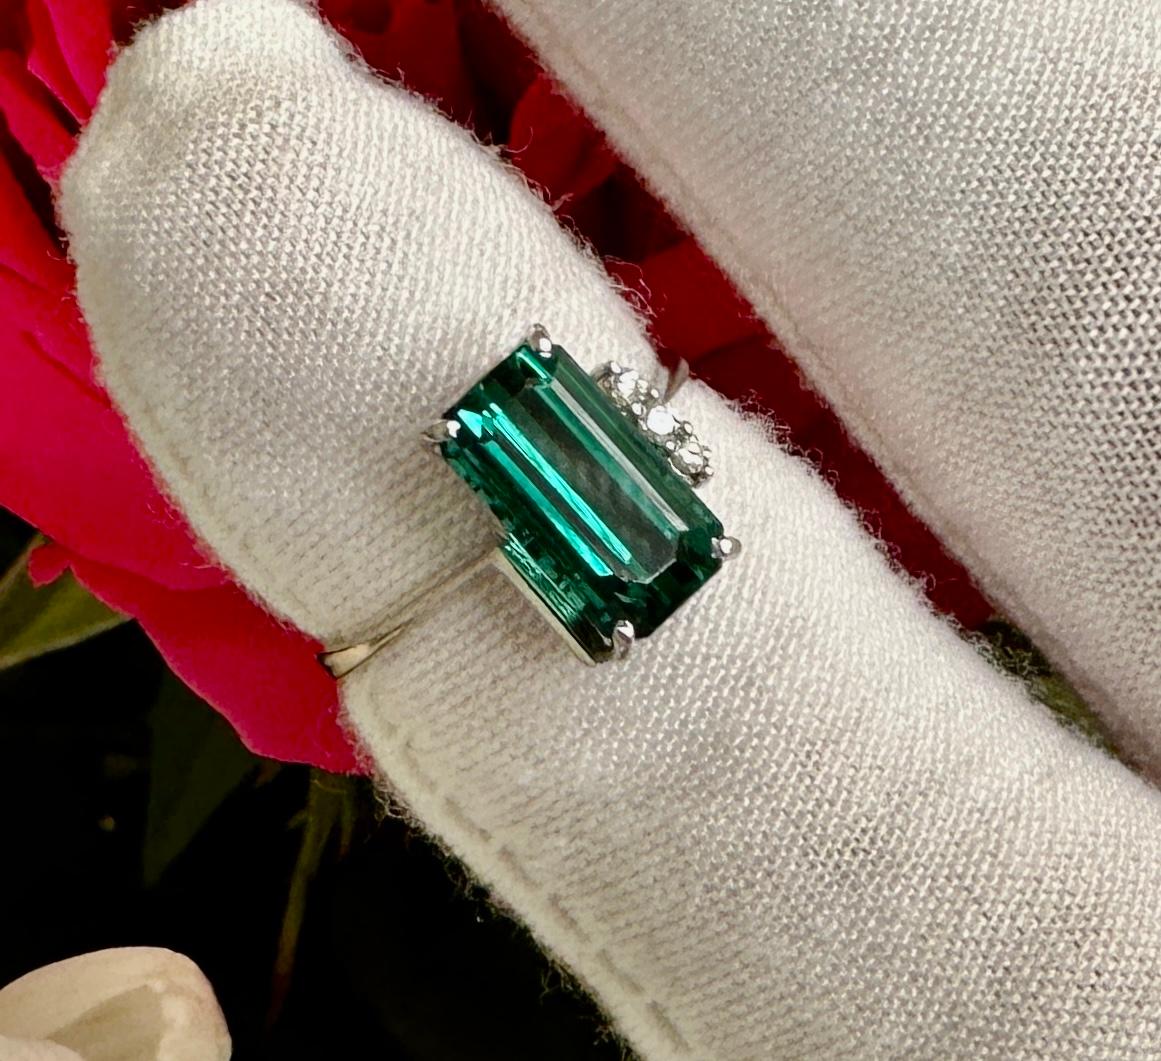 This is a magnificent Emerald Cut Green Tourmaline Ring with three sparkling white Diamonds in 18 Karat White Gold.  The extremely Fine Green Tourmaline is emerald cut and is 11mm by 6mm by 5mm deep and is approximately 2.6 Carats. 
It is a gorgeous